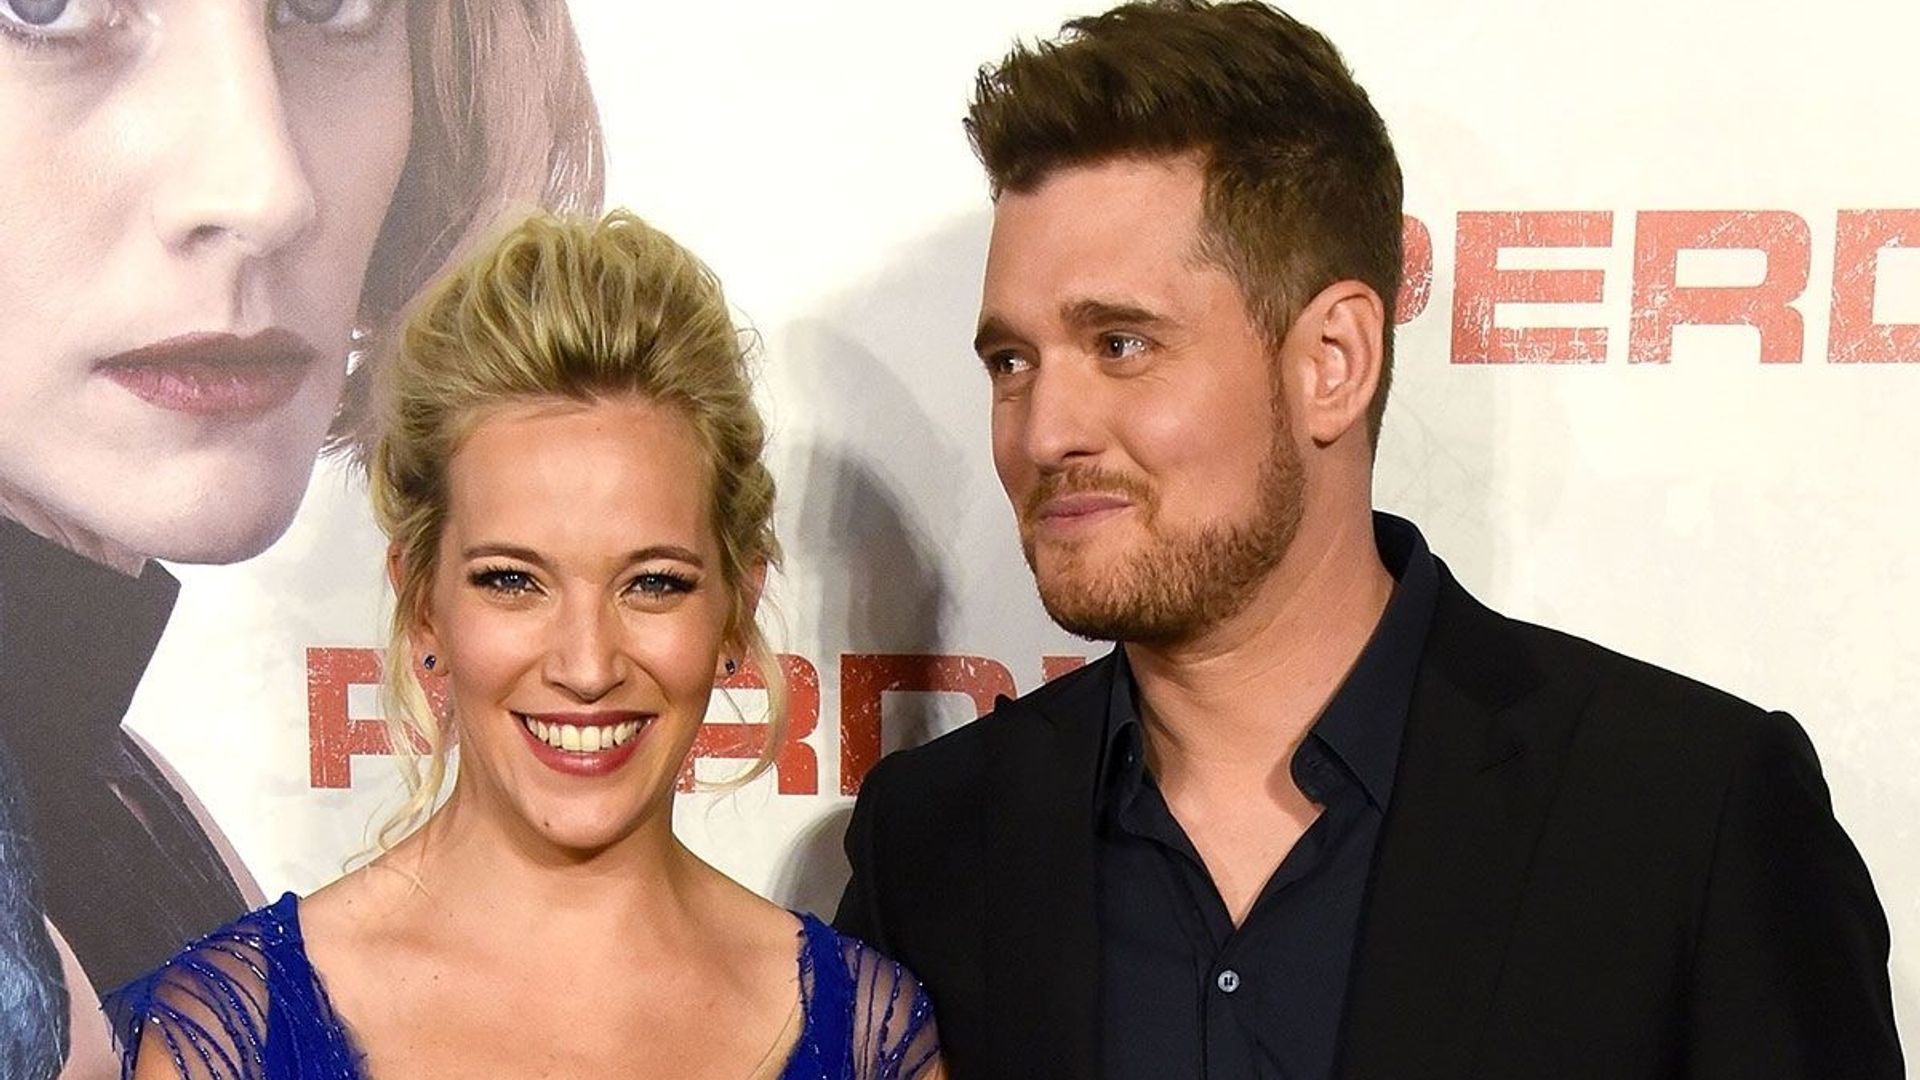 Michael Bublé and Luisana Lopilato are expecting their fourth child!